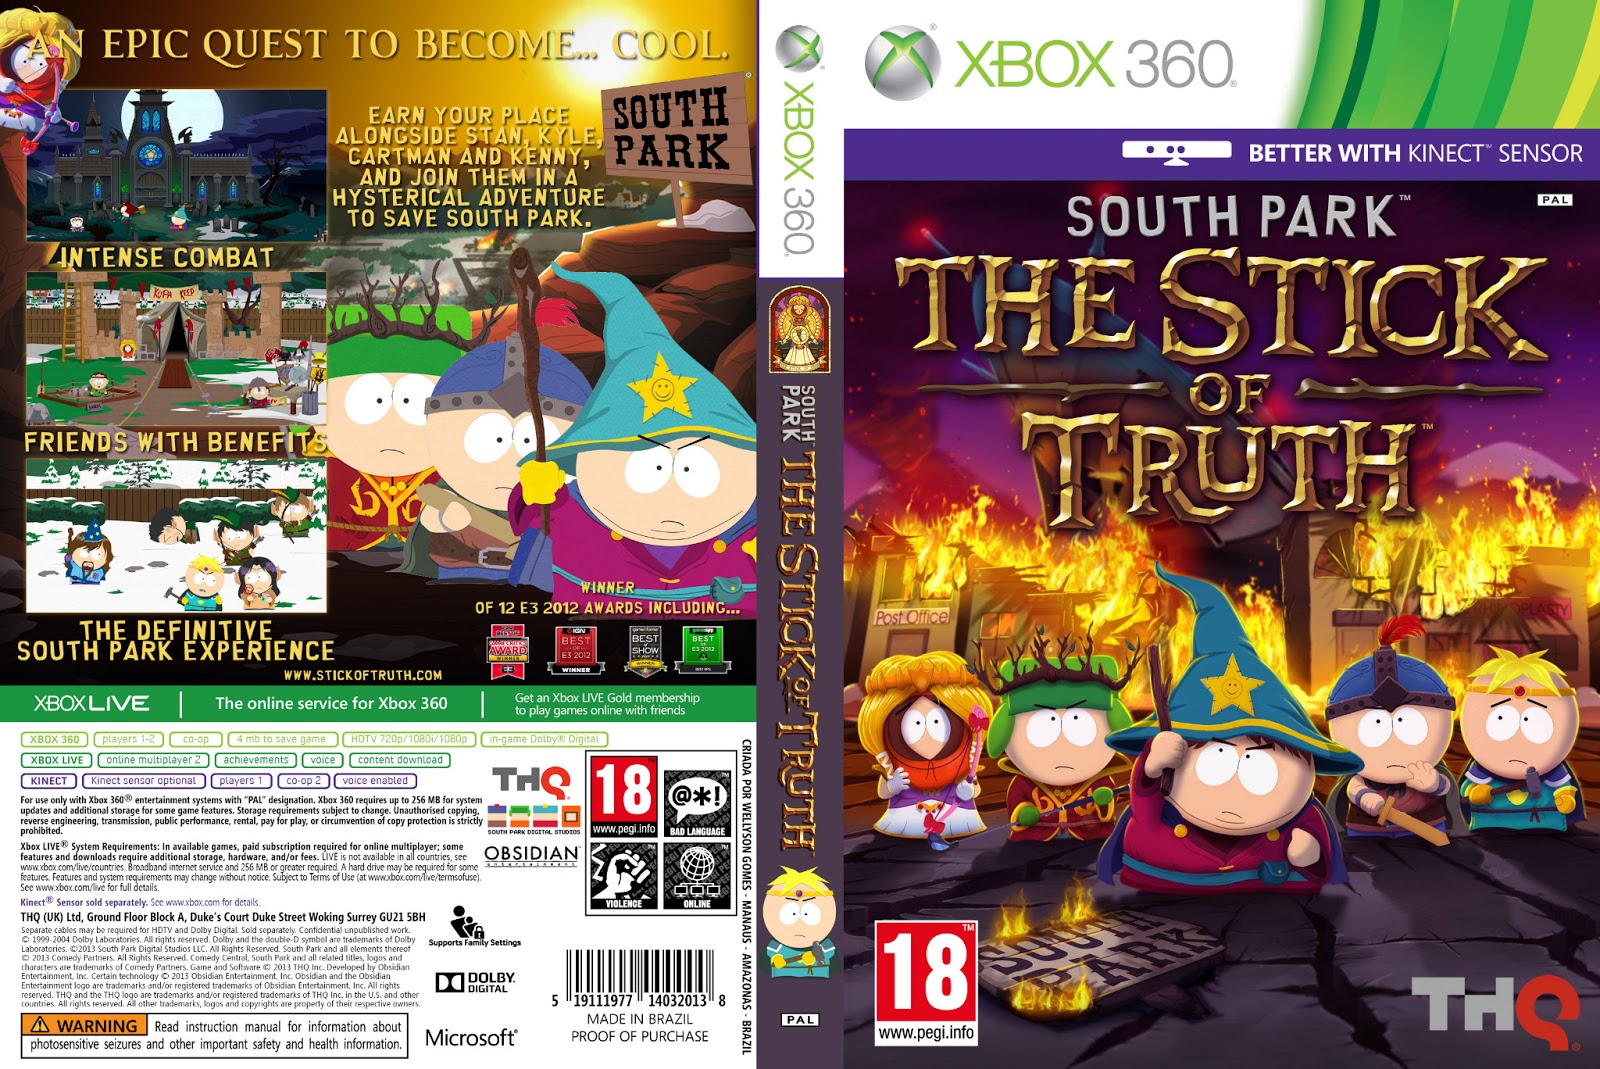 South Park: The Stick of Truth Xbox 360 55455 - Best Buy